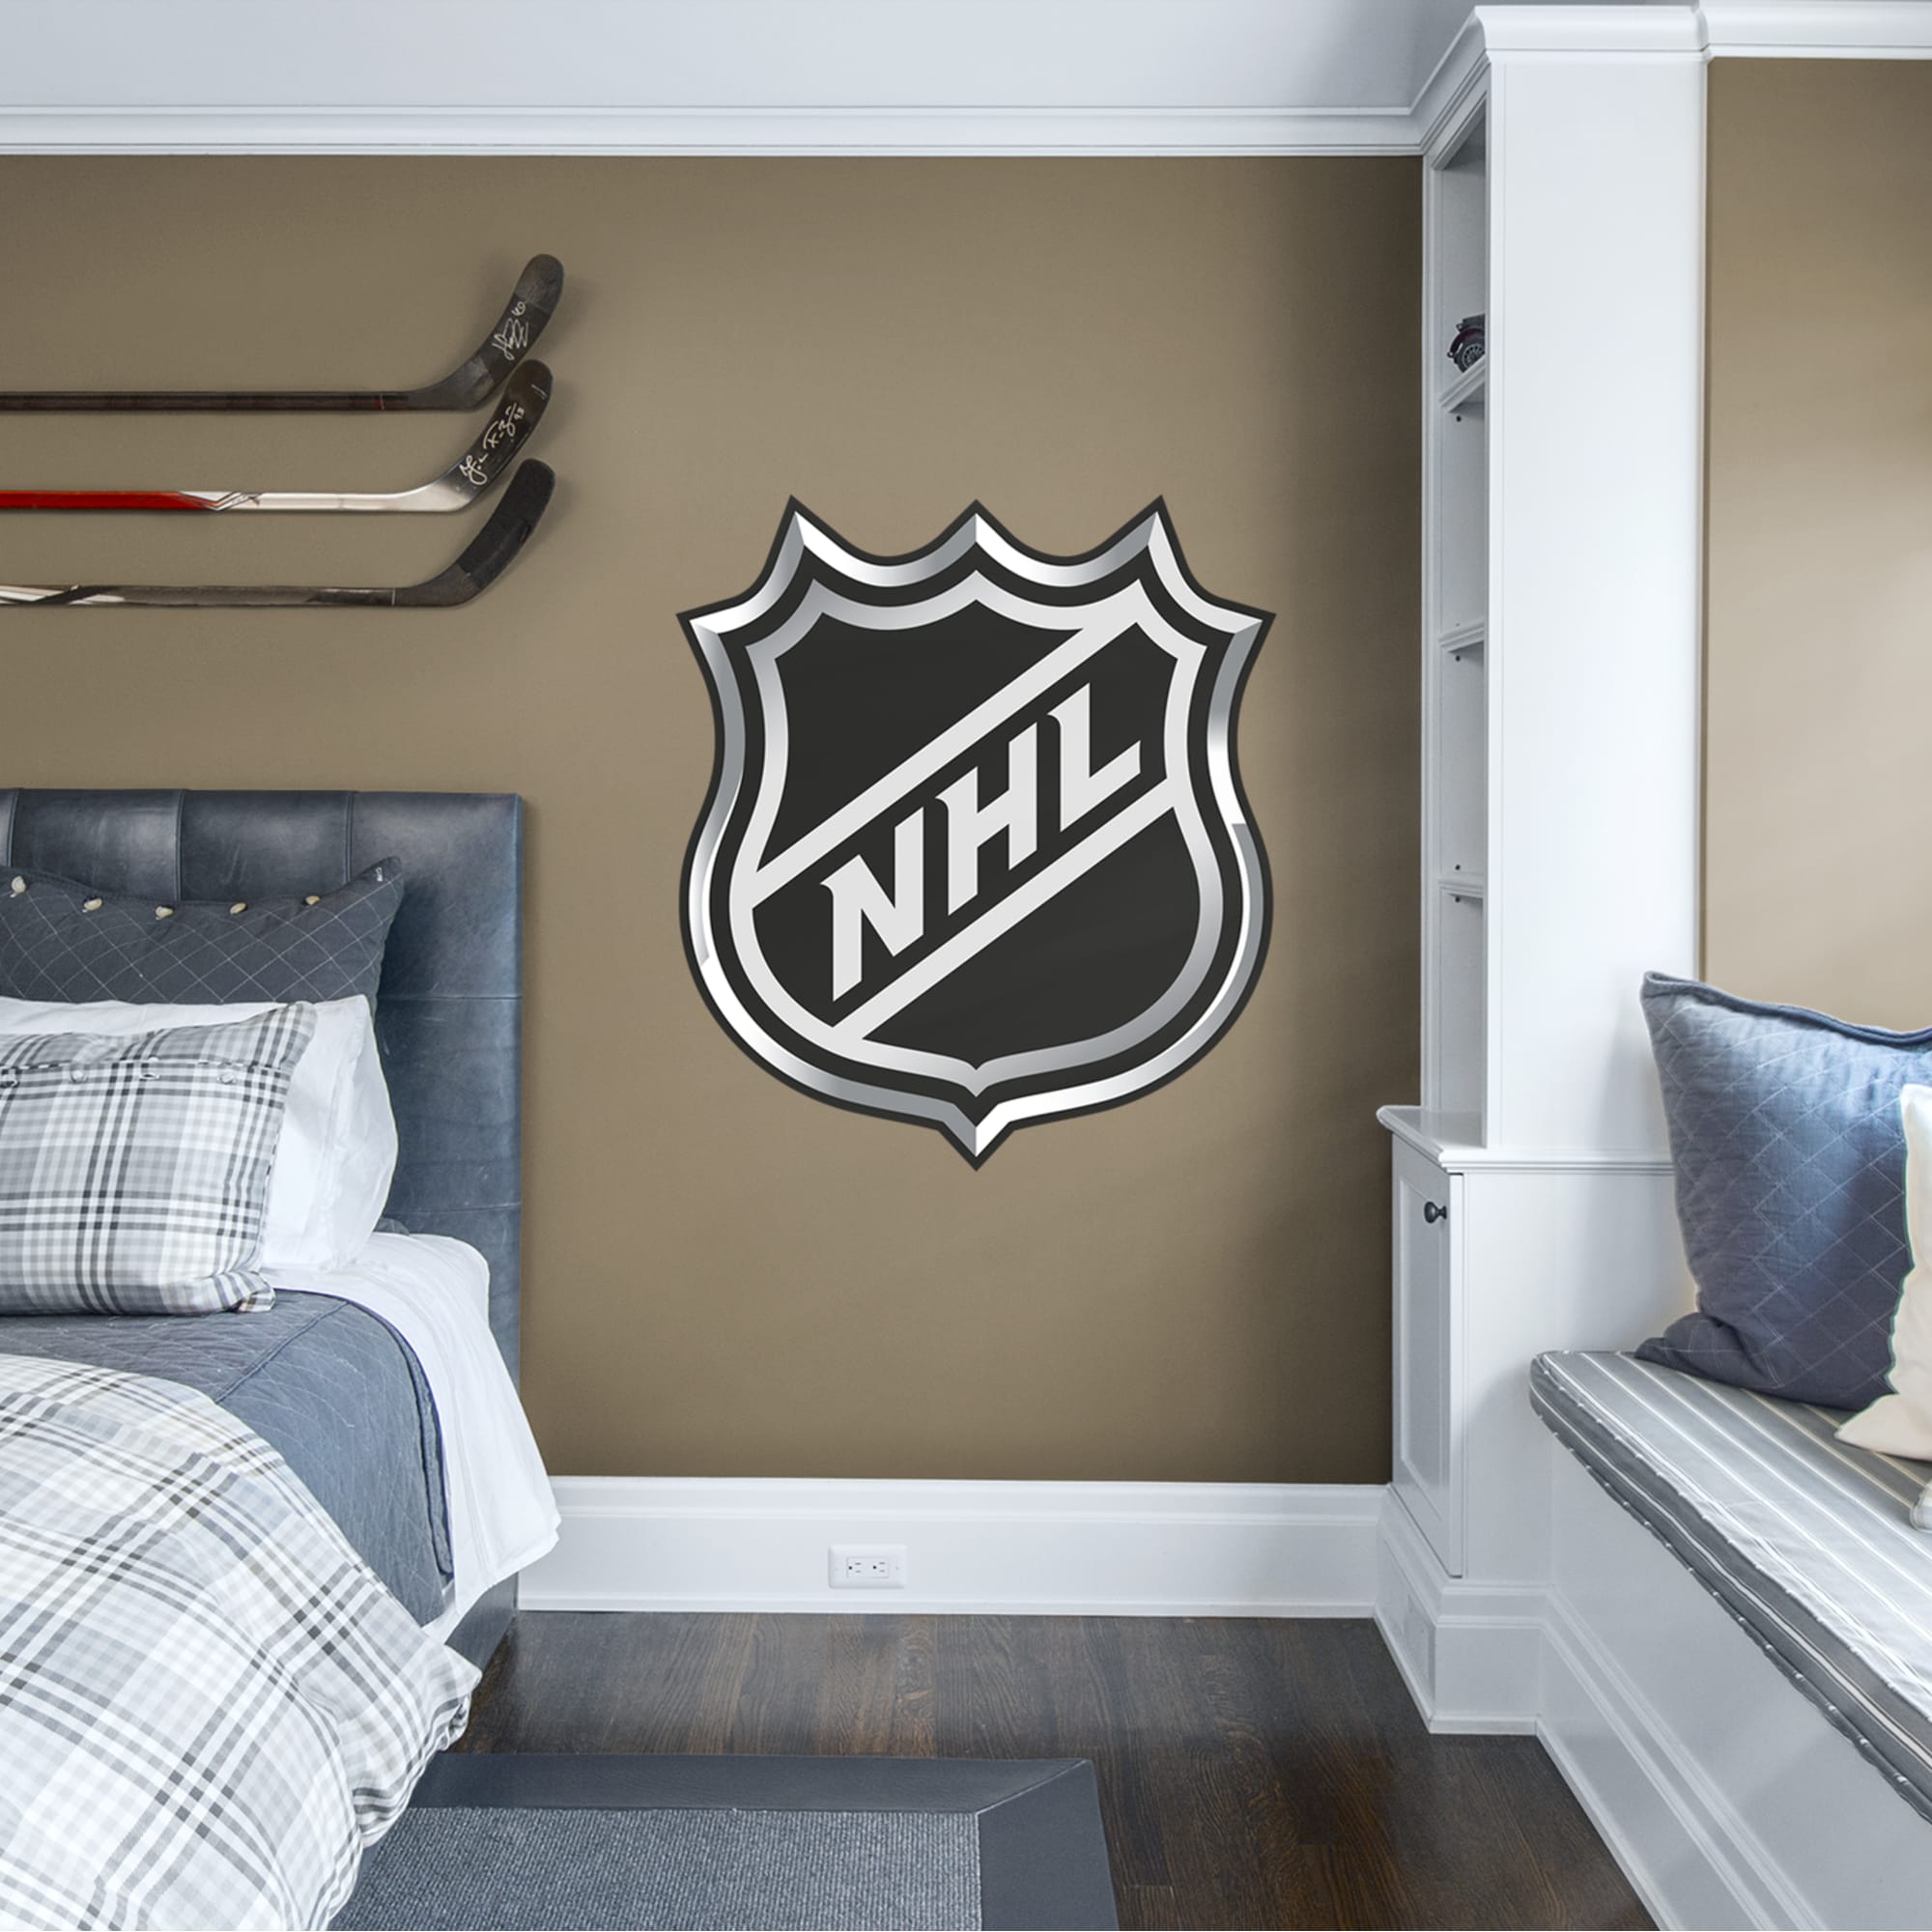 NHL: Logo - Officially Licensed Removable Wall Decal 43.0"W x 38.0"H by Fathead | Vinyl